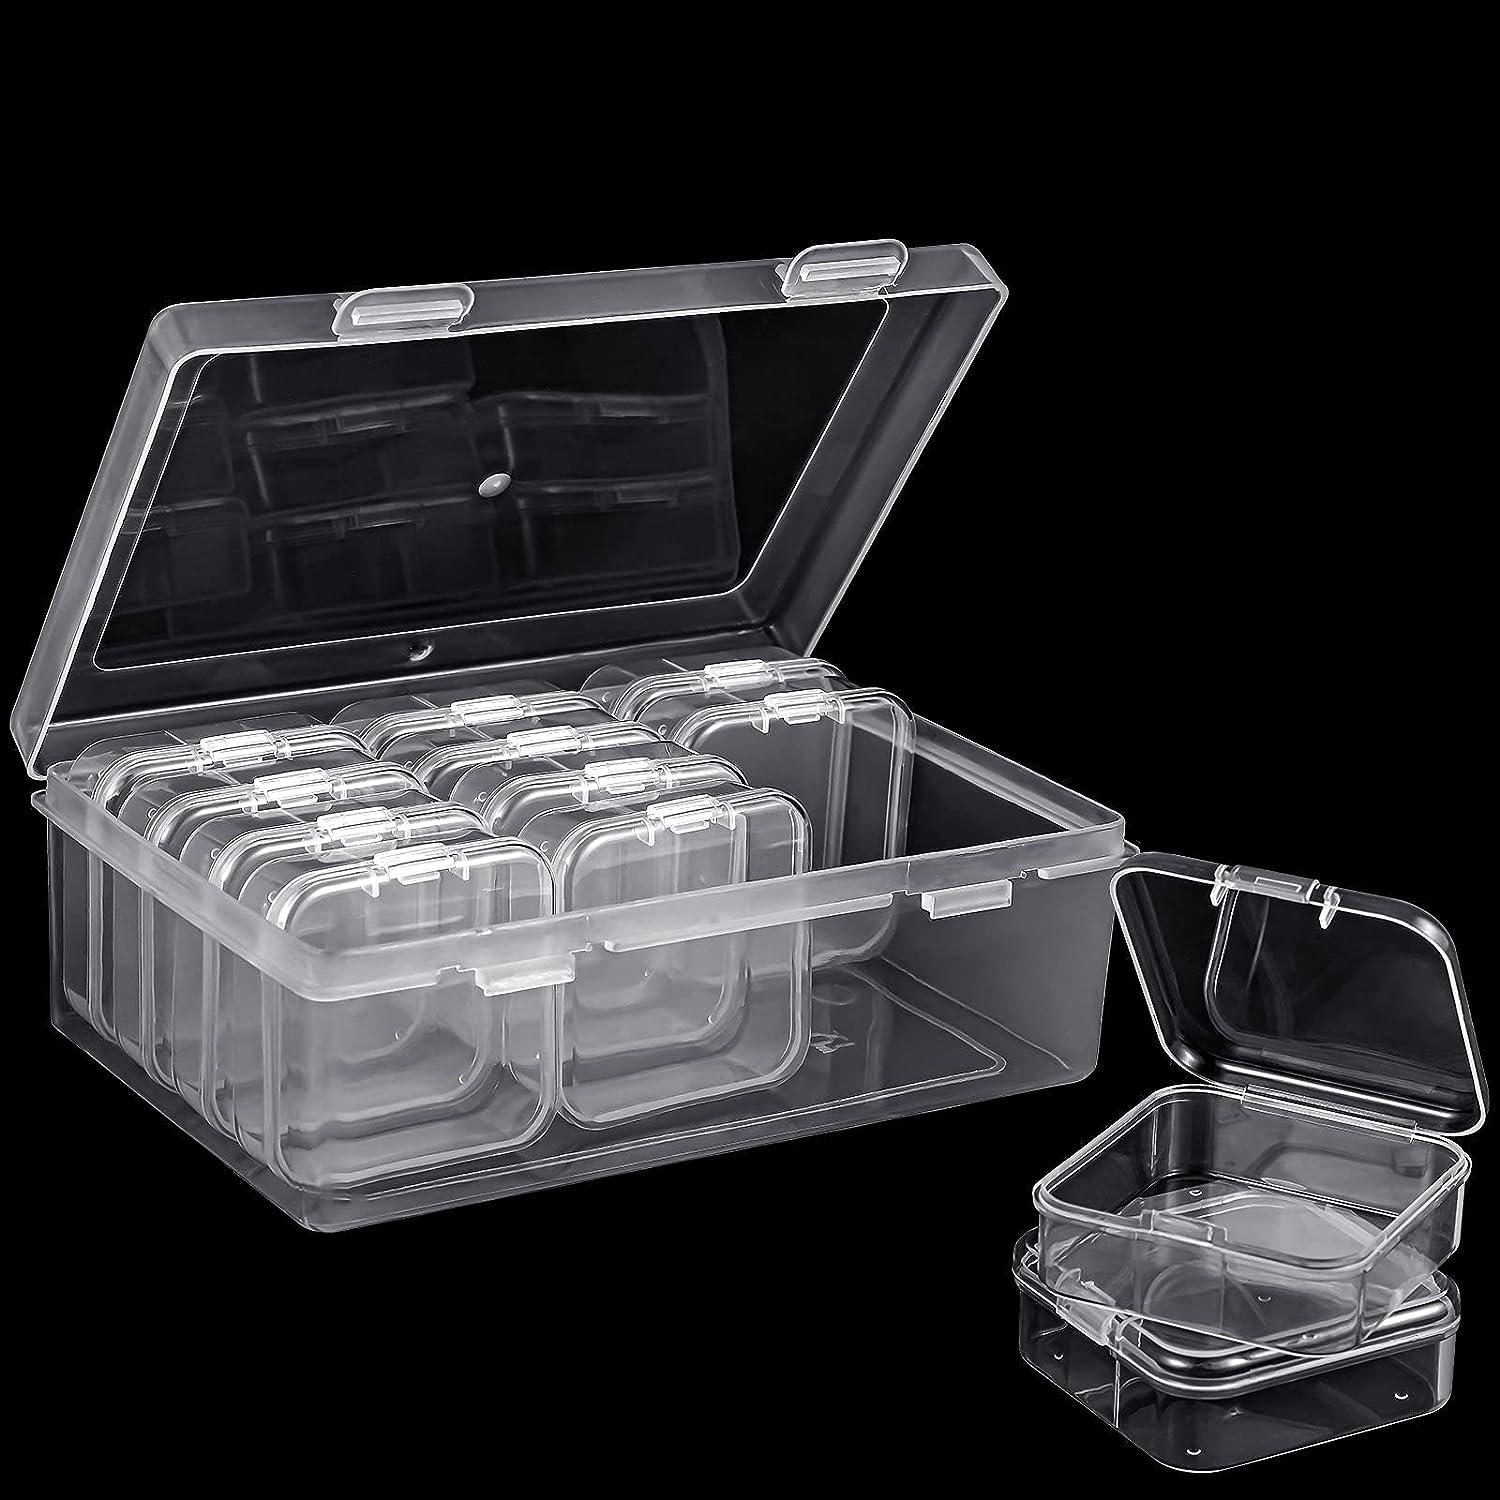 12 Pieces Small Clear Plastic Beads Storage Container and Organizer  Transparent Boxes with Hinged Lid for Storage of Small Items, Jewelry,  Diamonds, DIY Art Craft Accessory 2.12 x 2.12 x 0.79 Inch